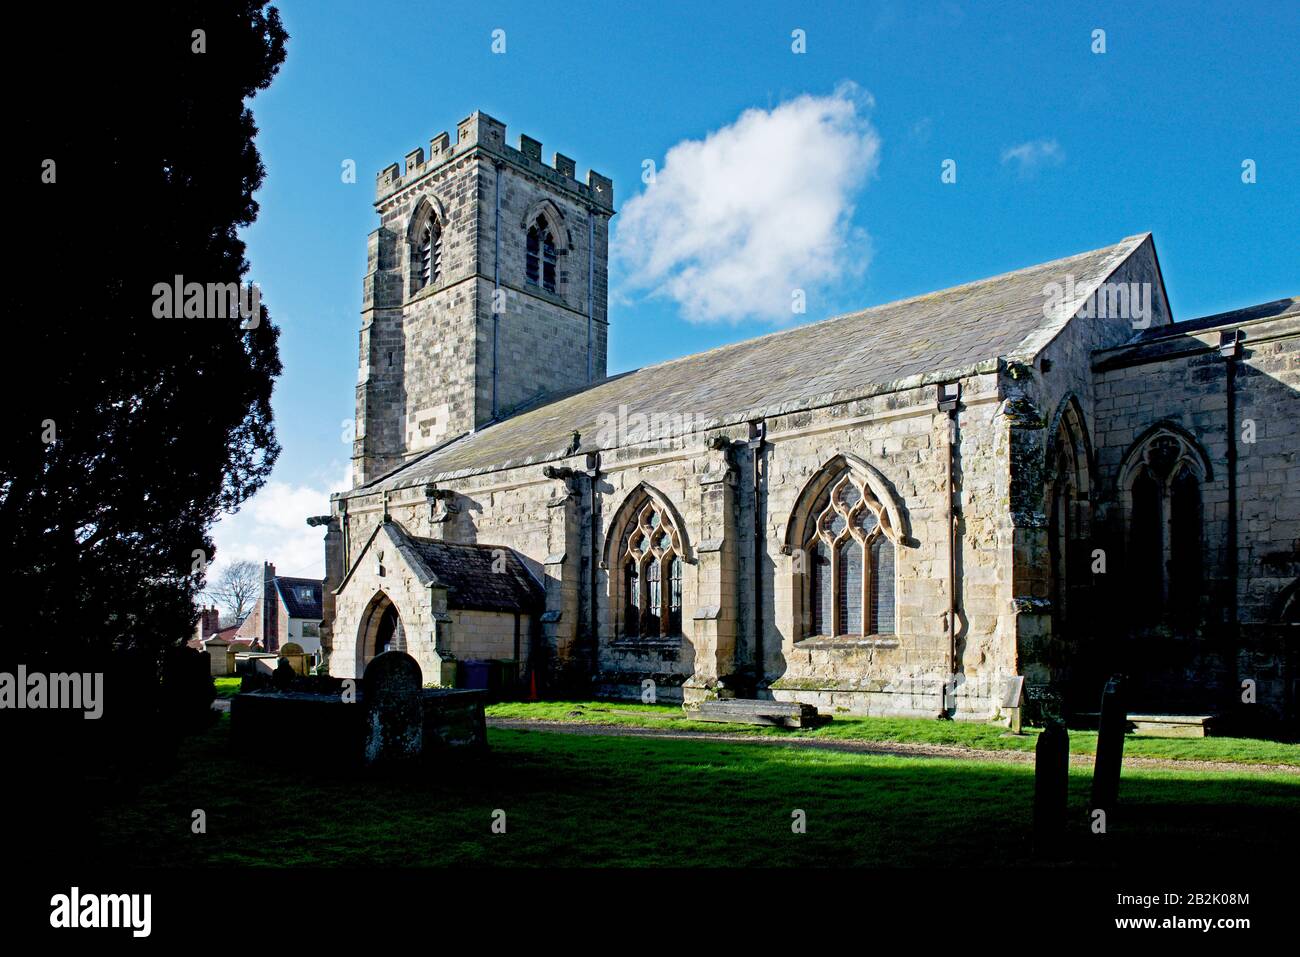 St Andrew's Church in the village of Bainton, East Yorkshire, England UK Stock Photo